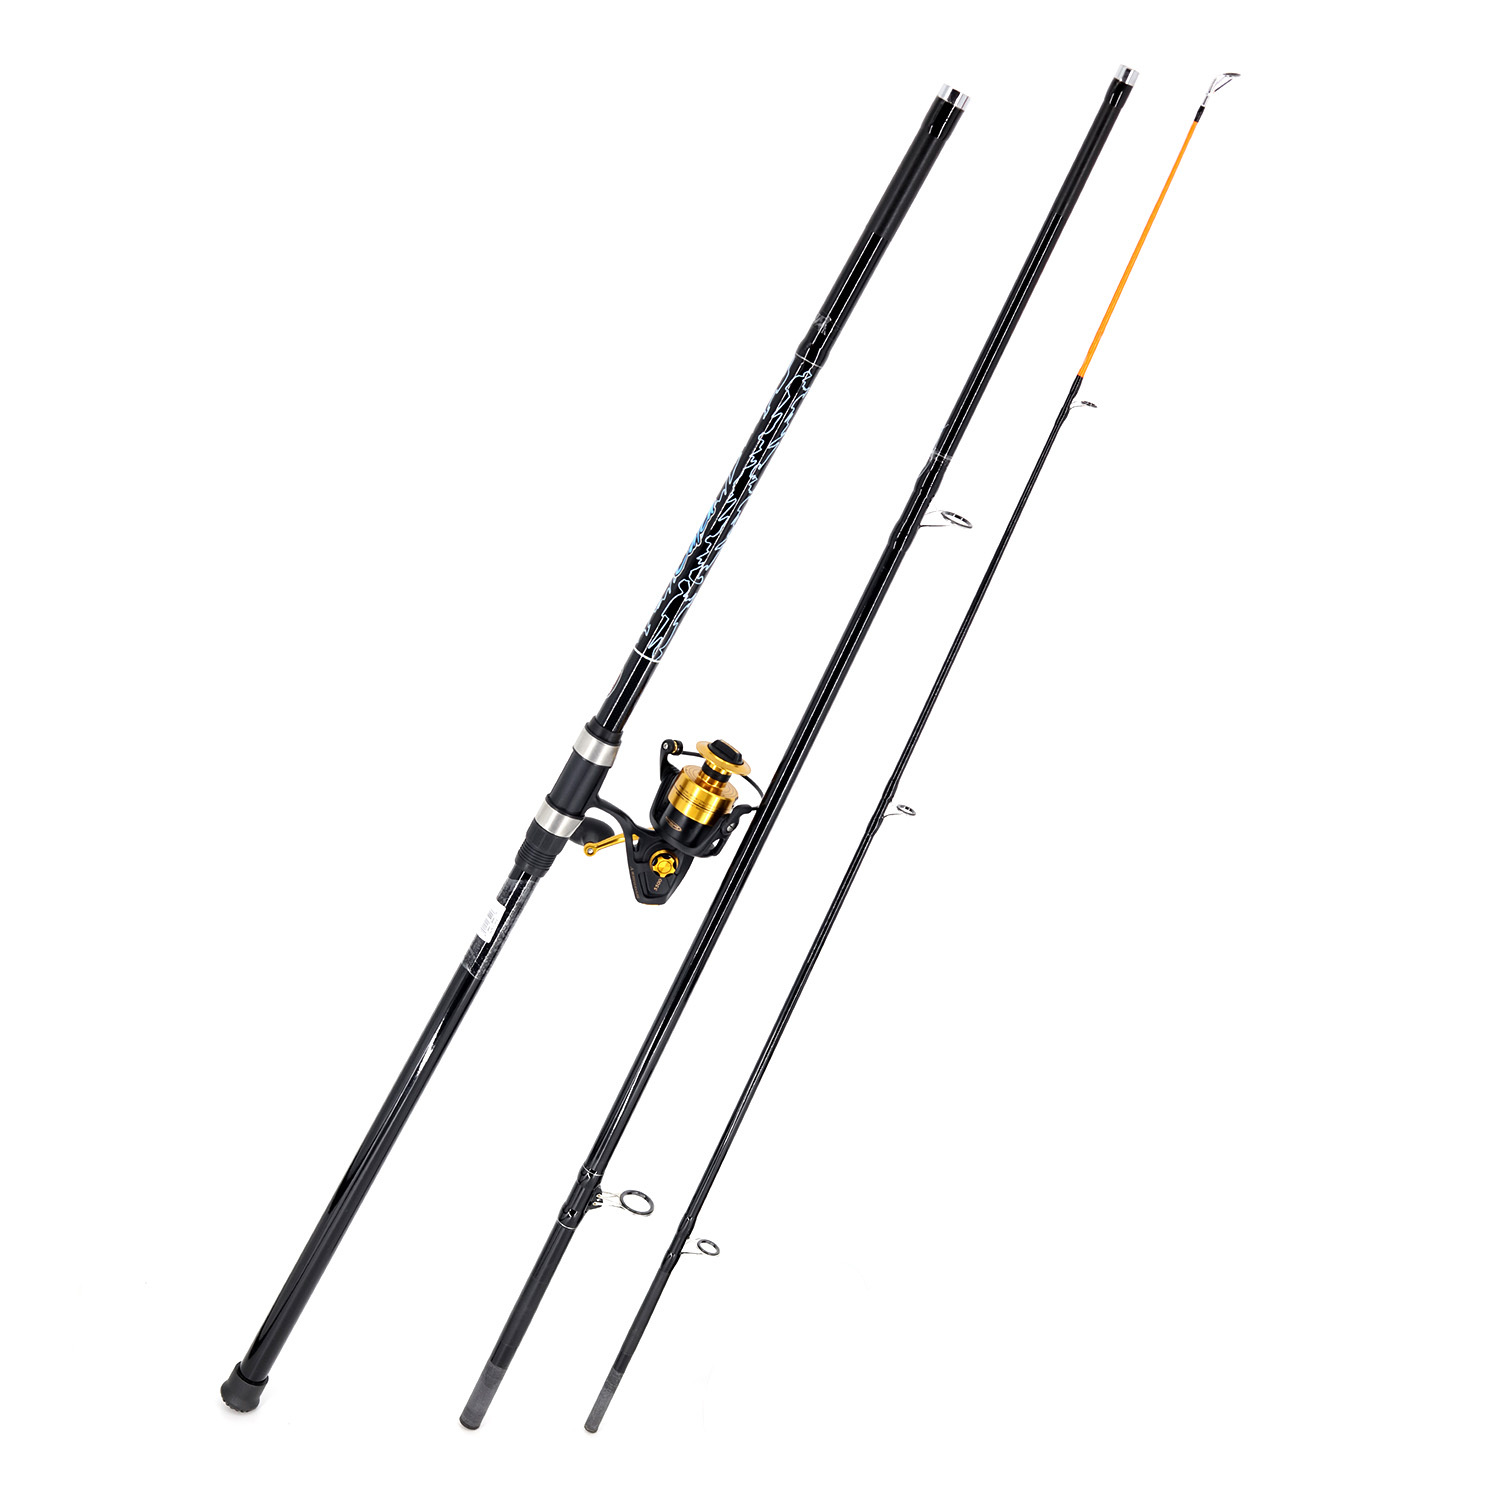 Shore Fishing (Mitchell 4.2m and Penn V 5500 and snap swivels) Combo